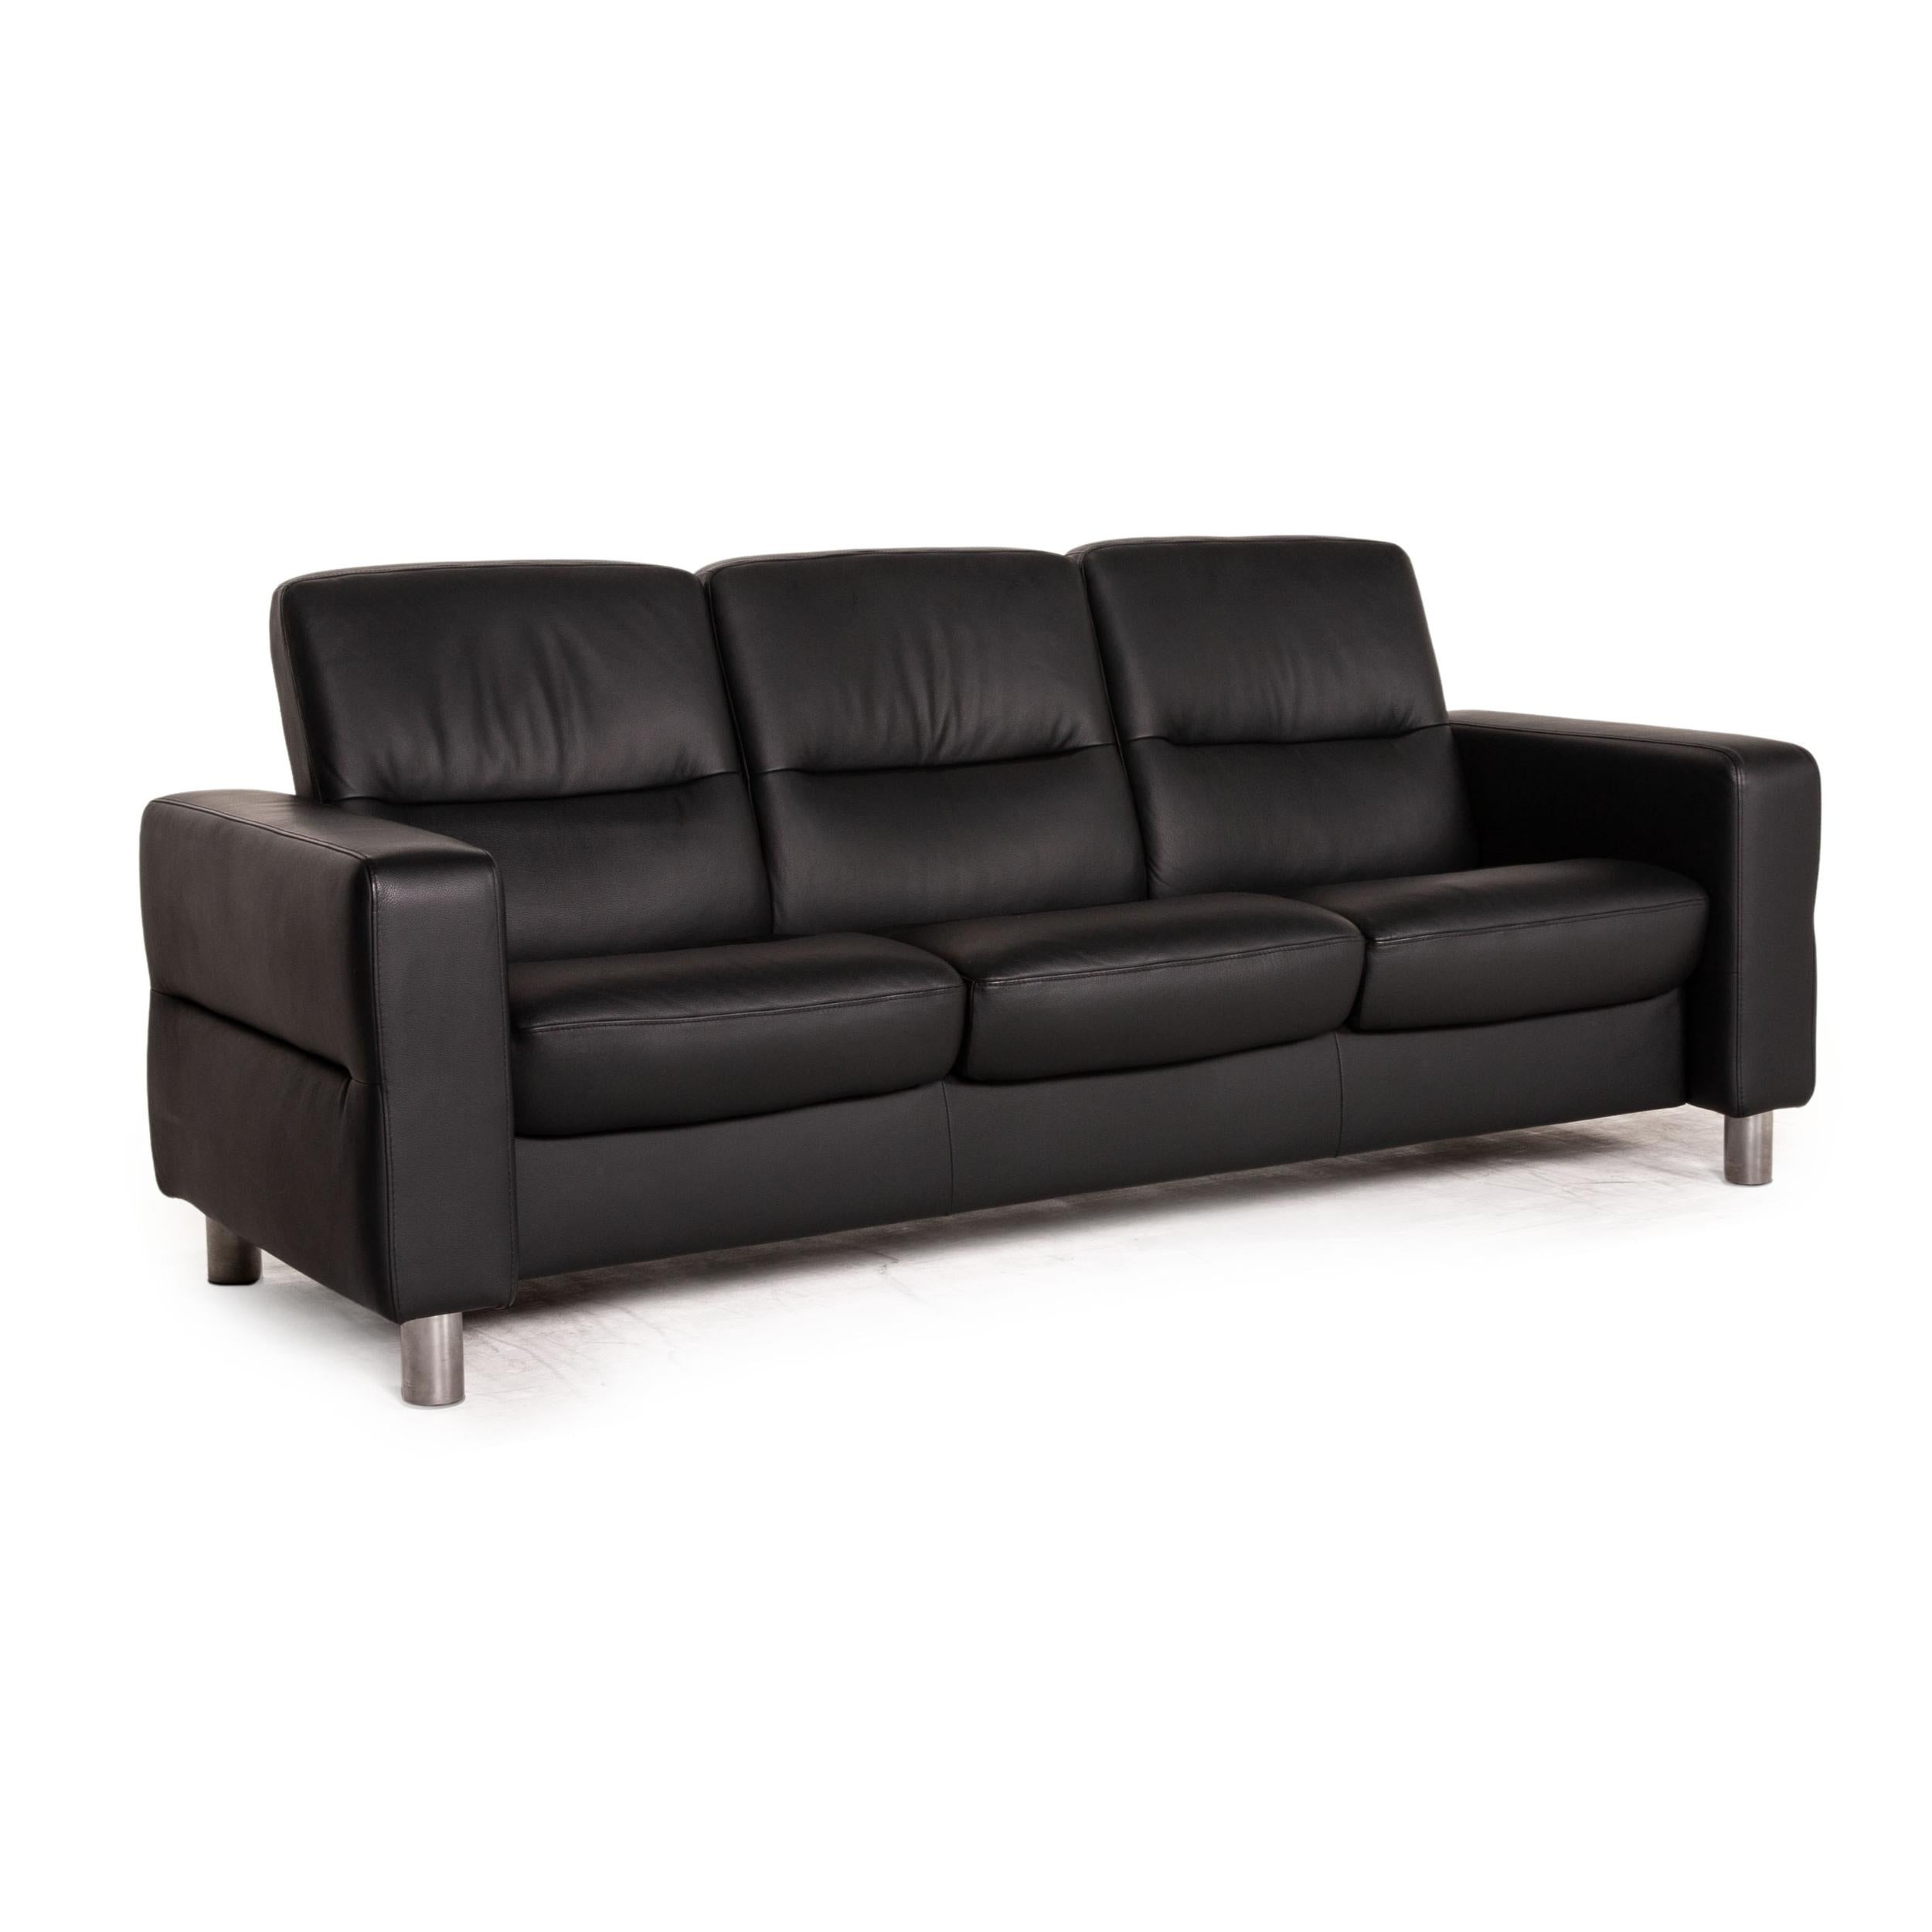 Stressless Waver Three Seater Leather Sofa Black Couch 1